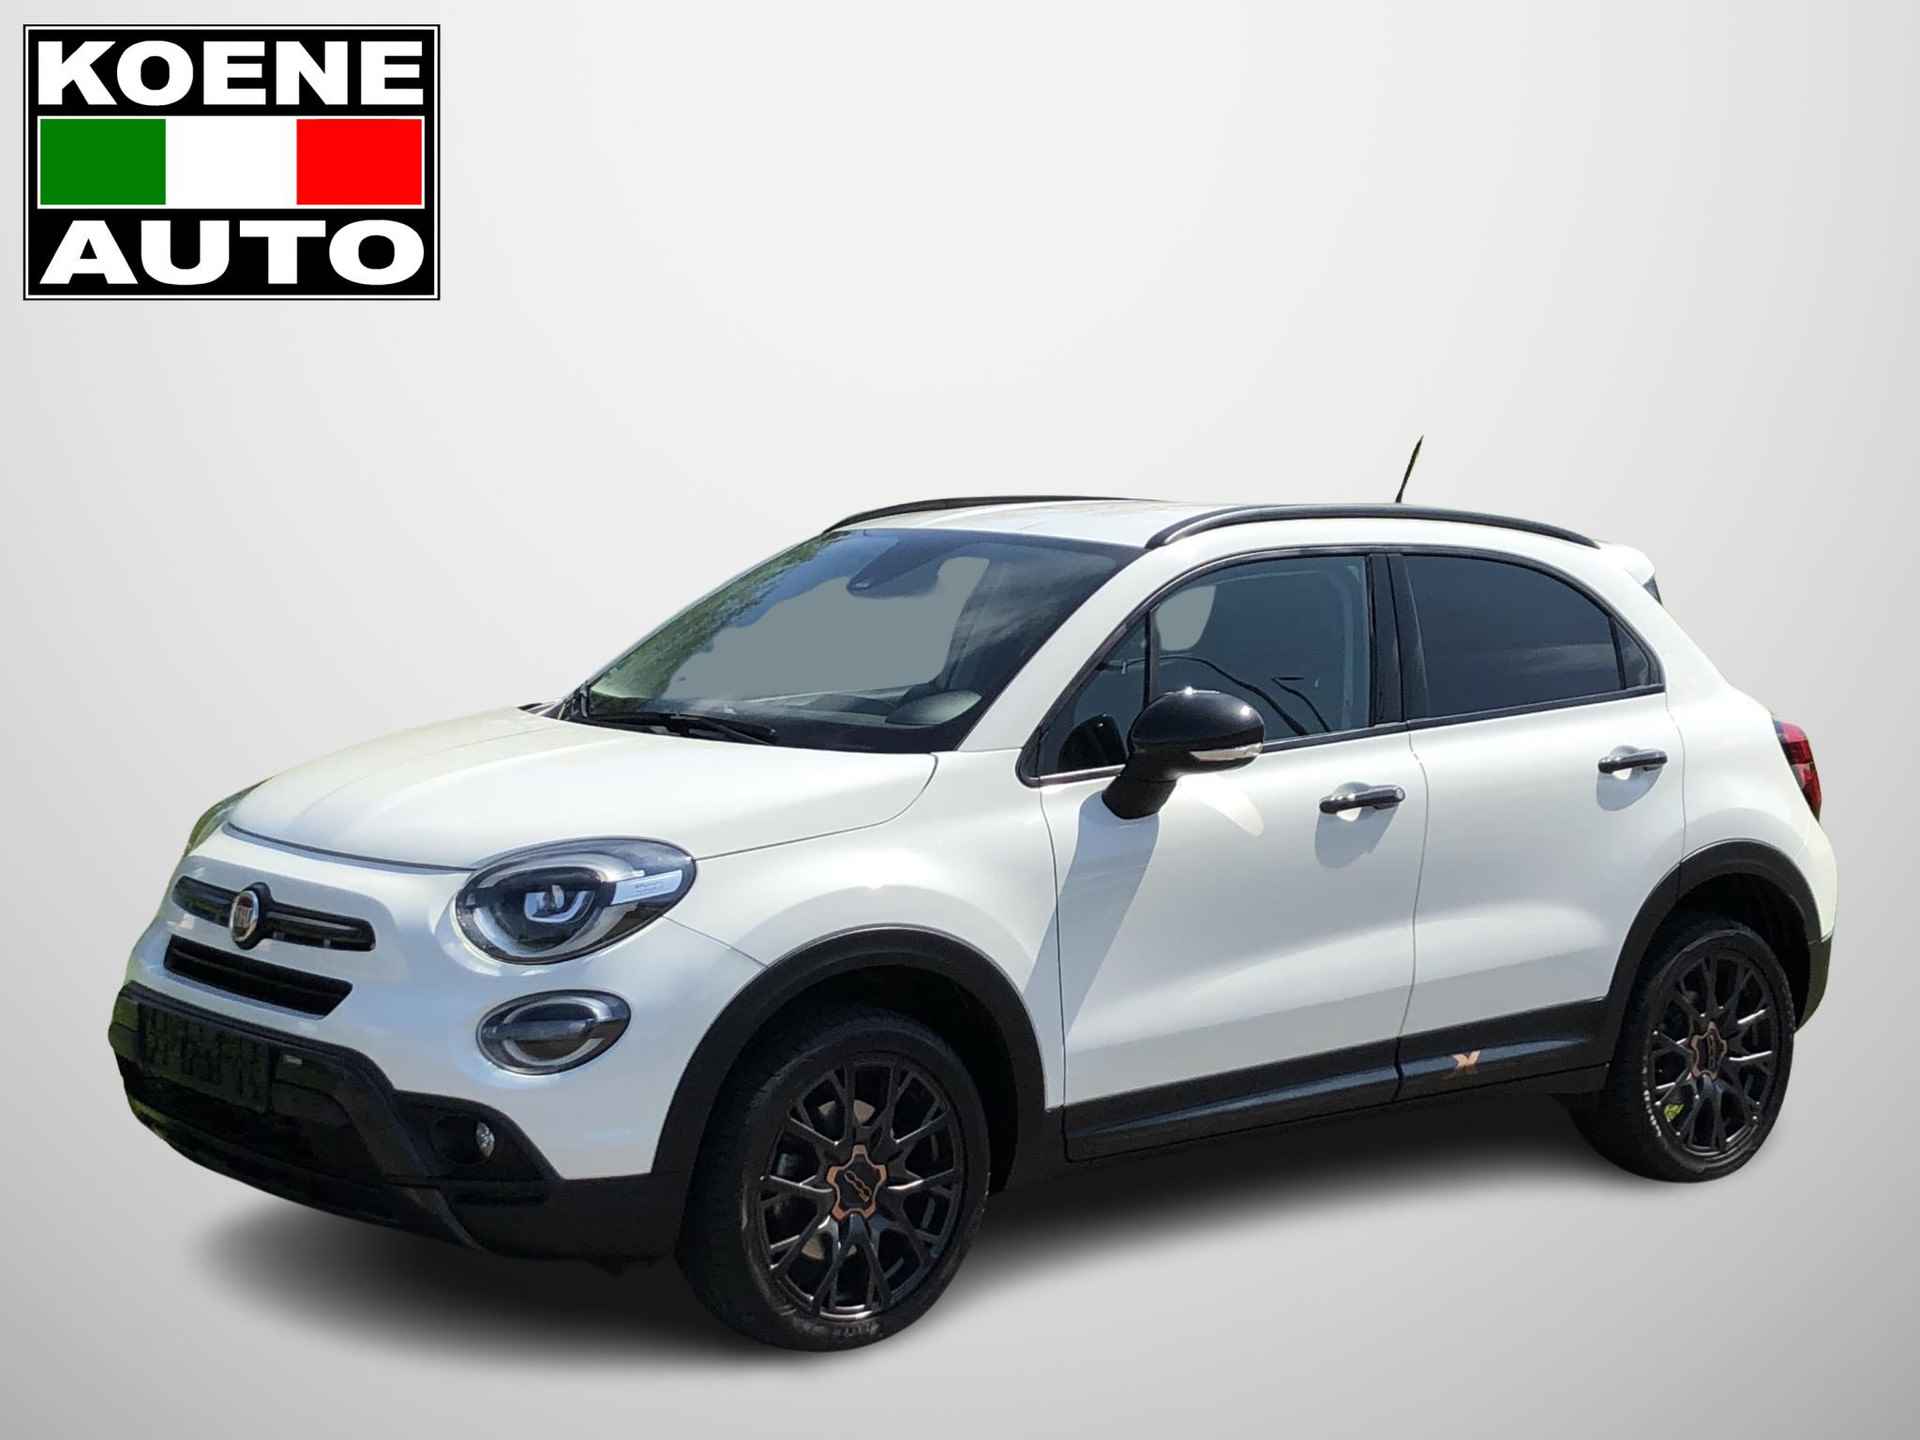 Fiat 500 X Cross 1.3 GSE City Cross S-Design DCT AUTOMAAT NAVI CLIMATE CAMERA APPLE/ANDROID STOELVERWARMING PDC 18" - 1/34